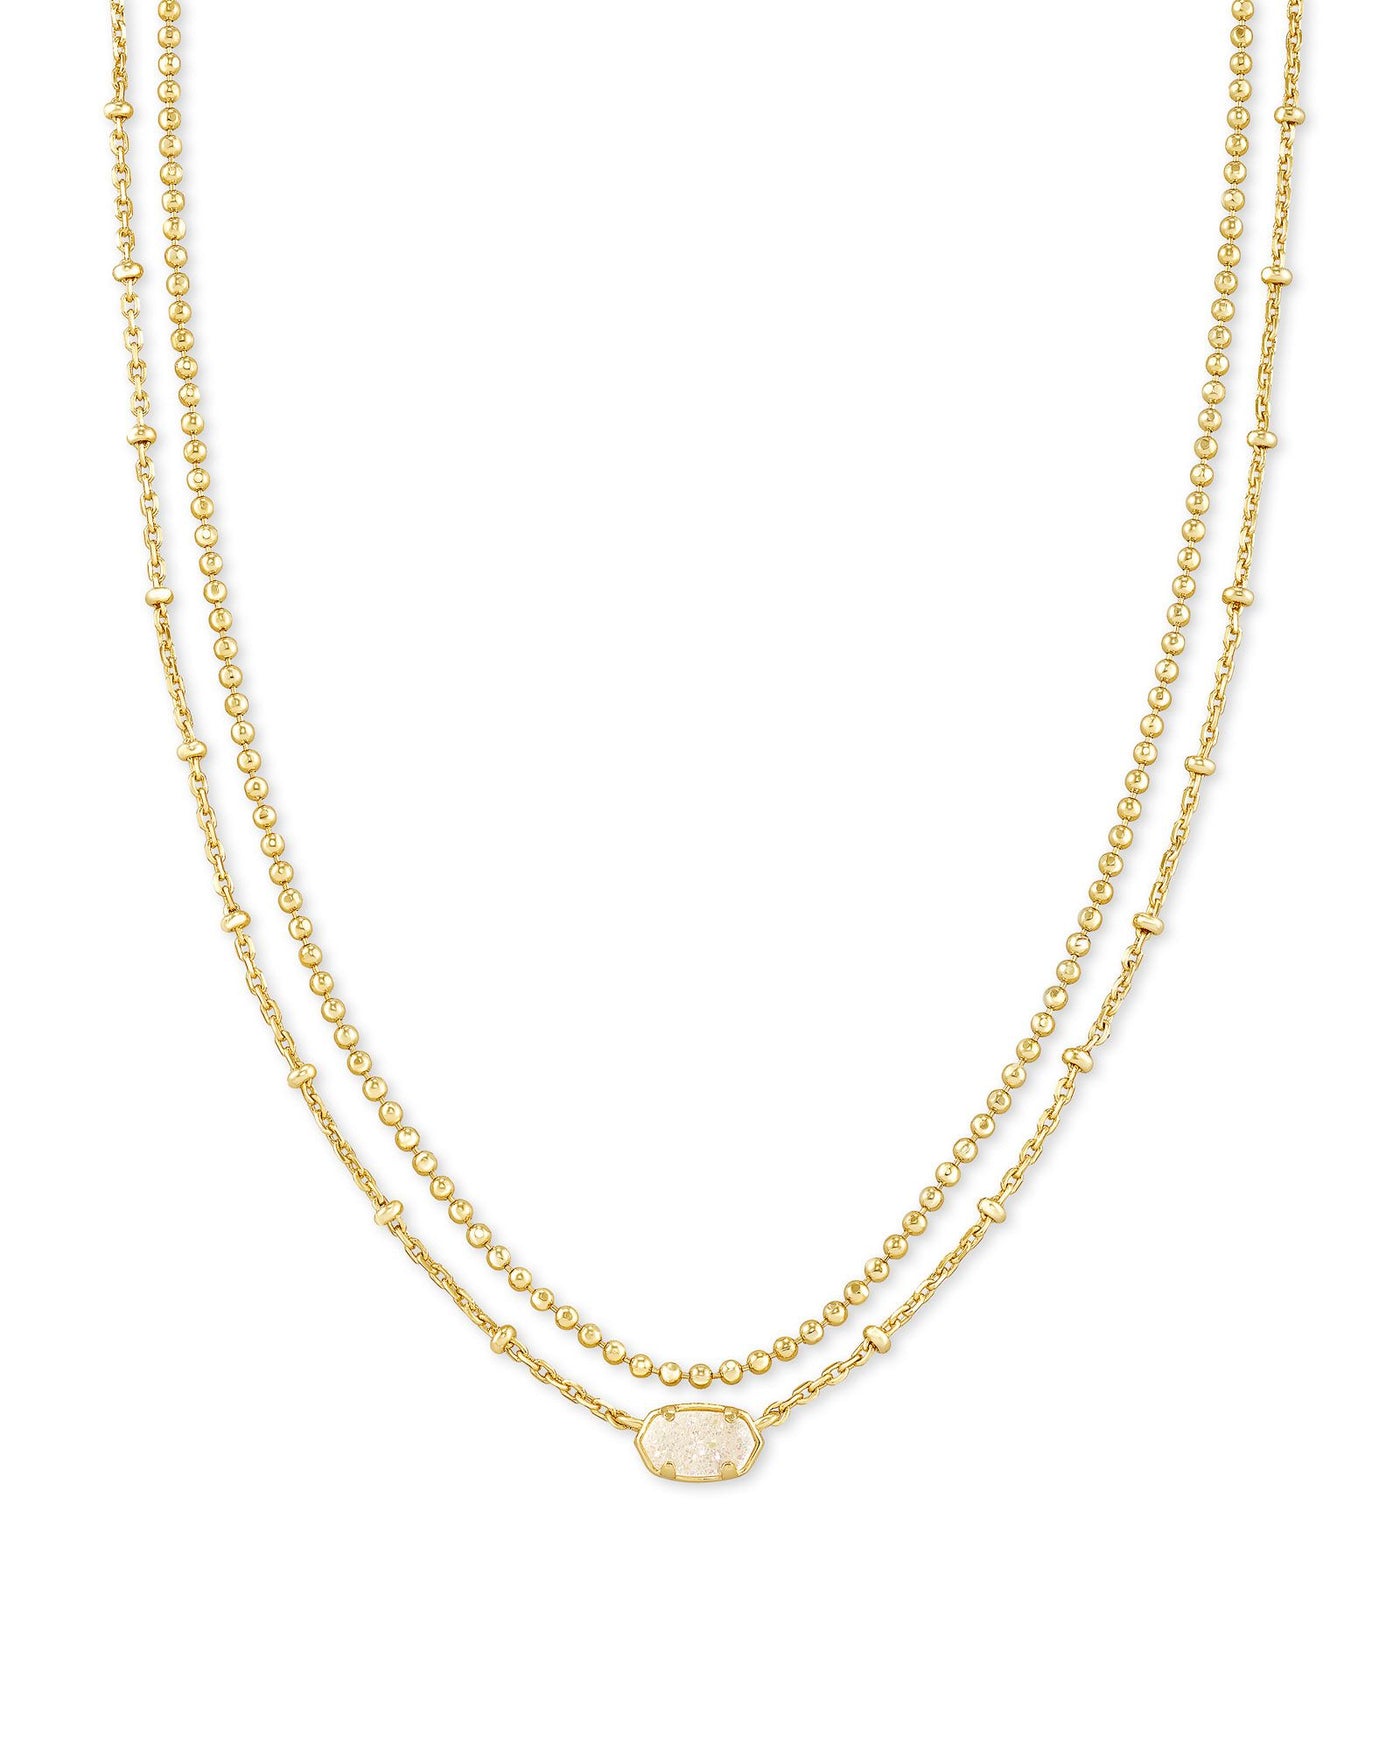 Emilie Multi-Strand Necklace Gold Iridescent Drusy on white background, front view.